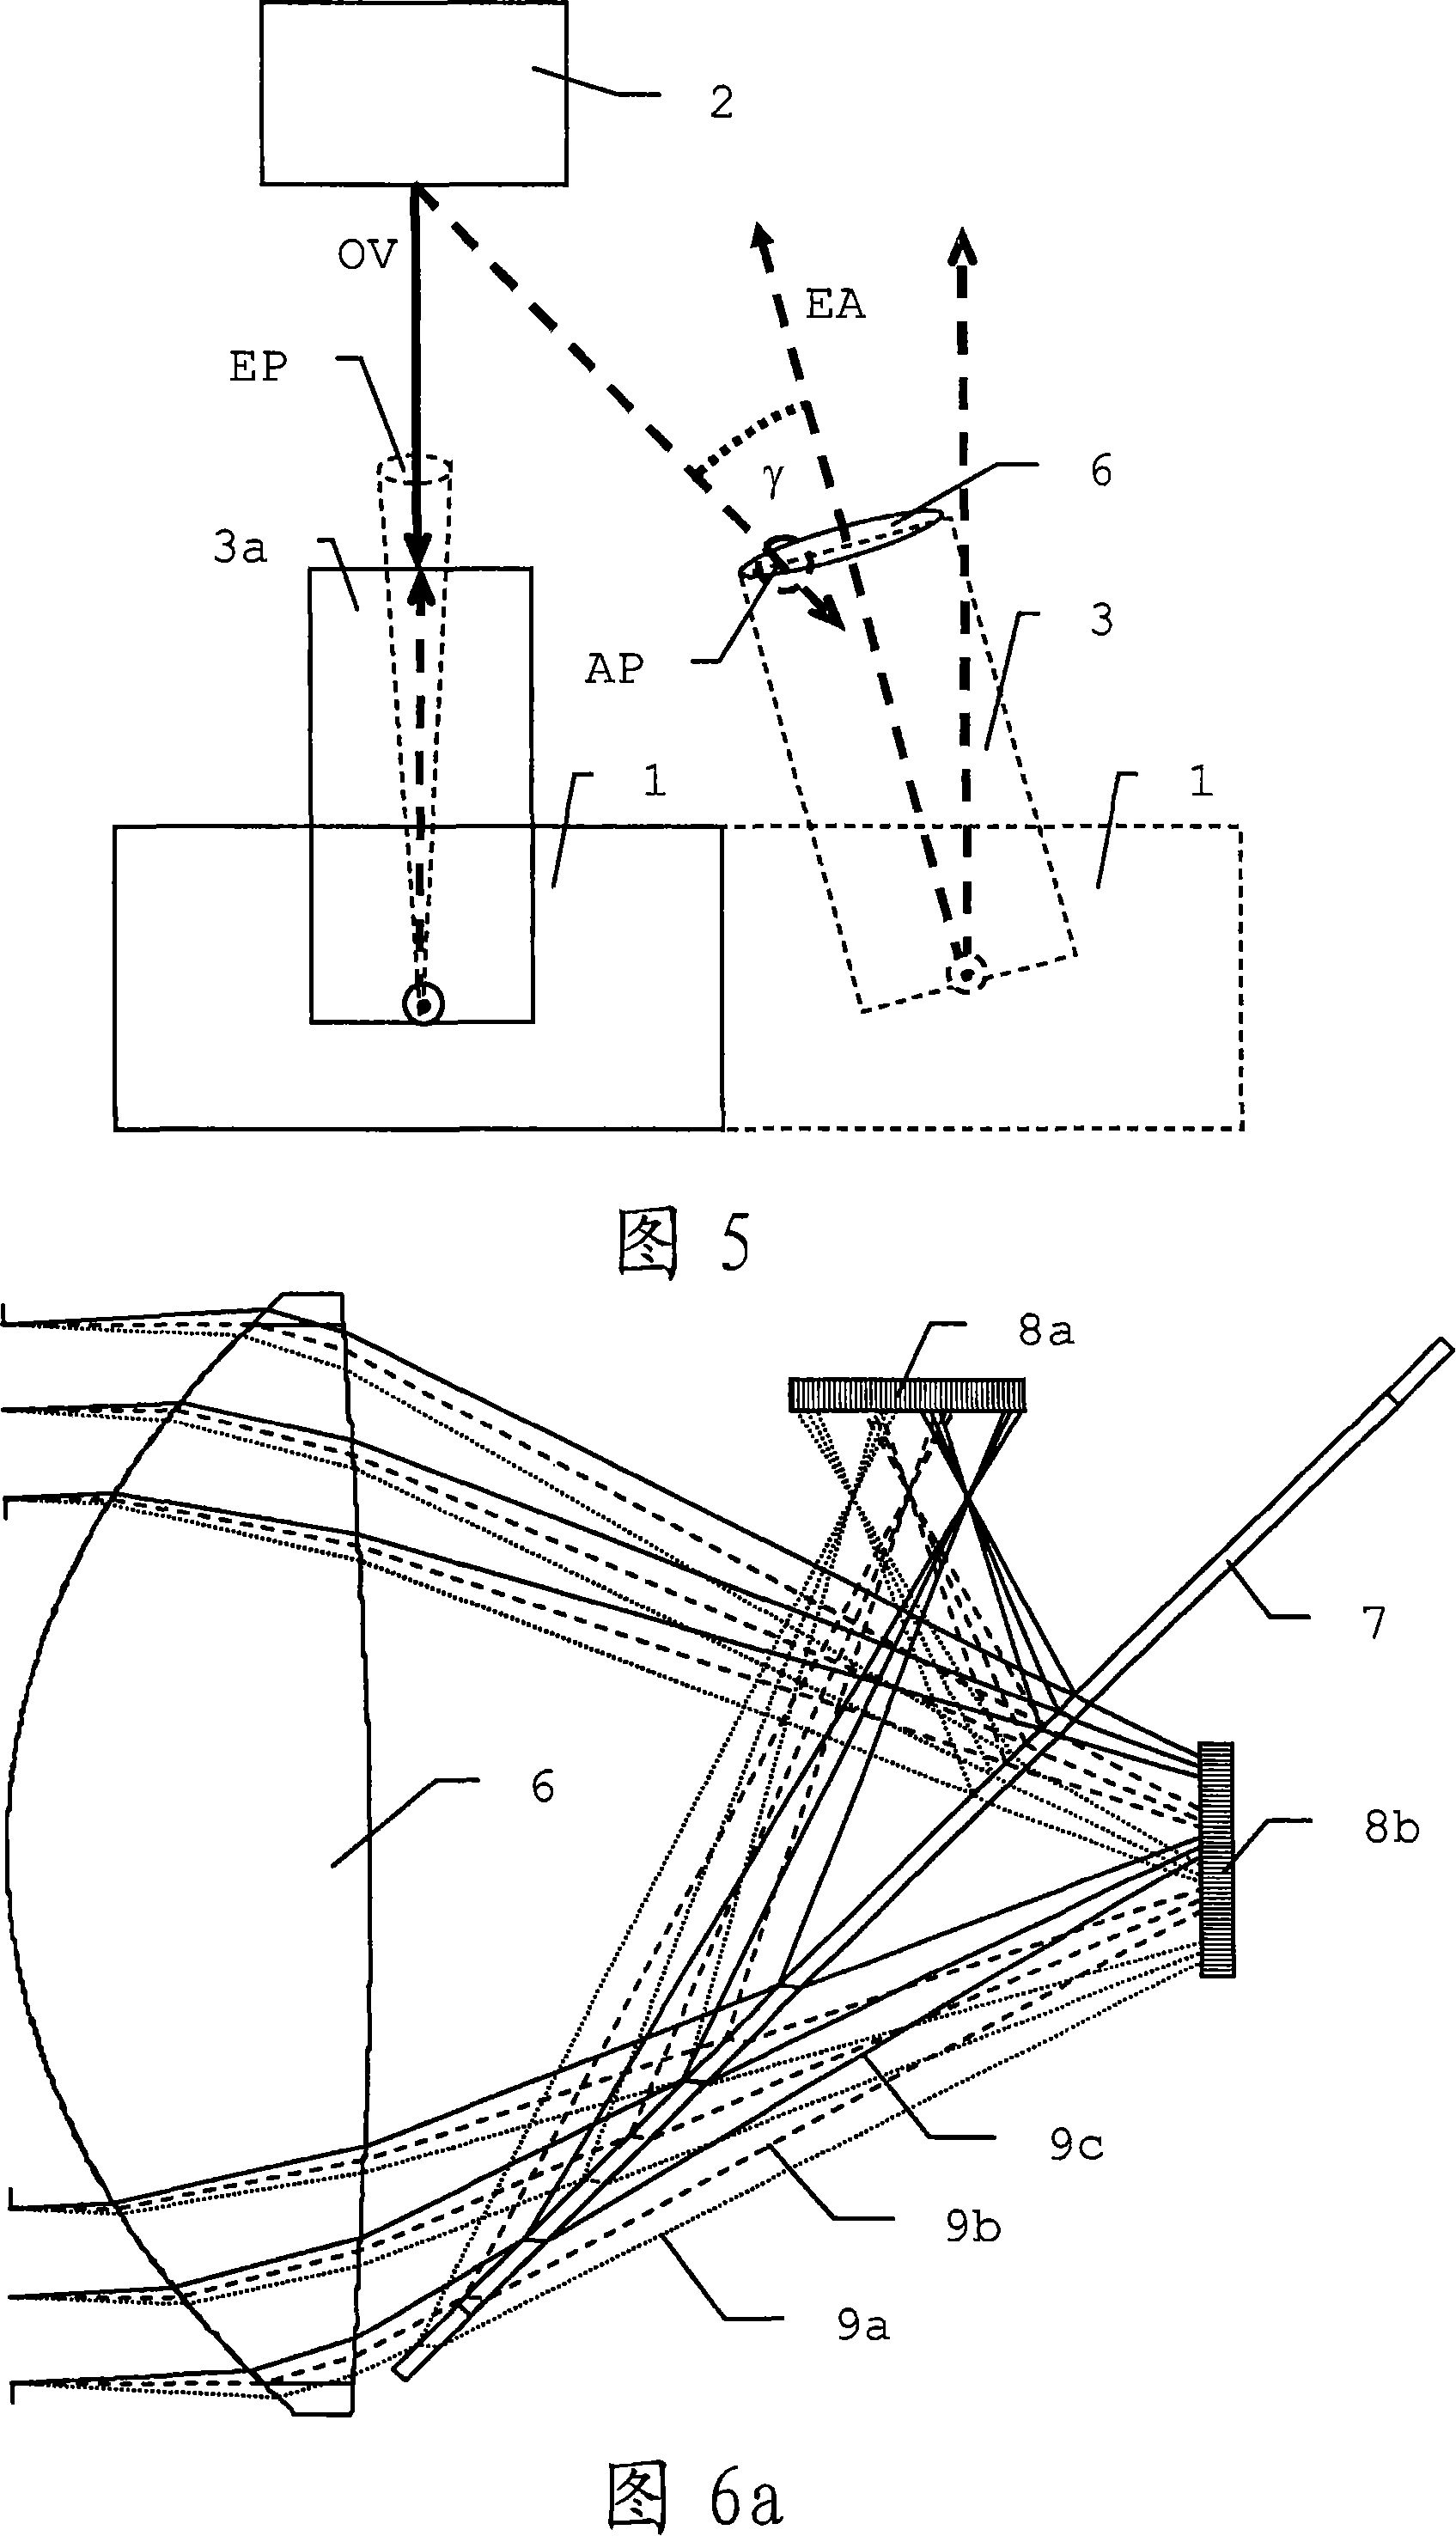 Method and system for determining position and orientation of an object